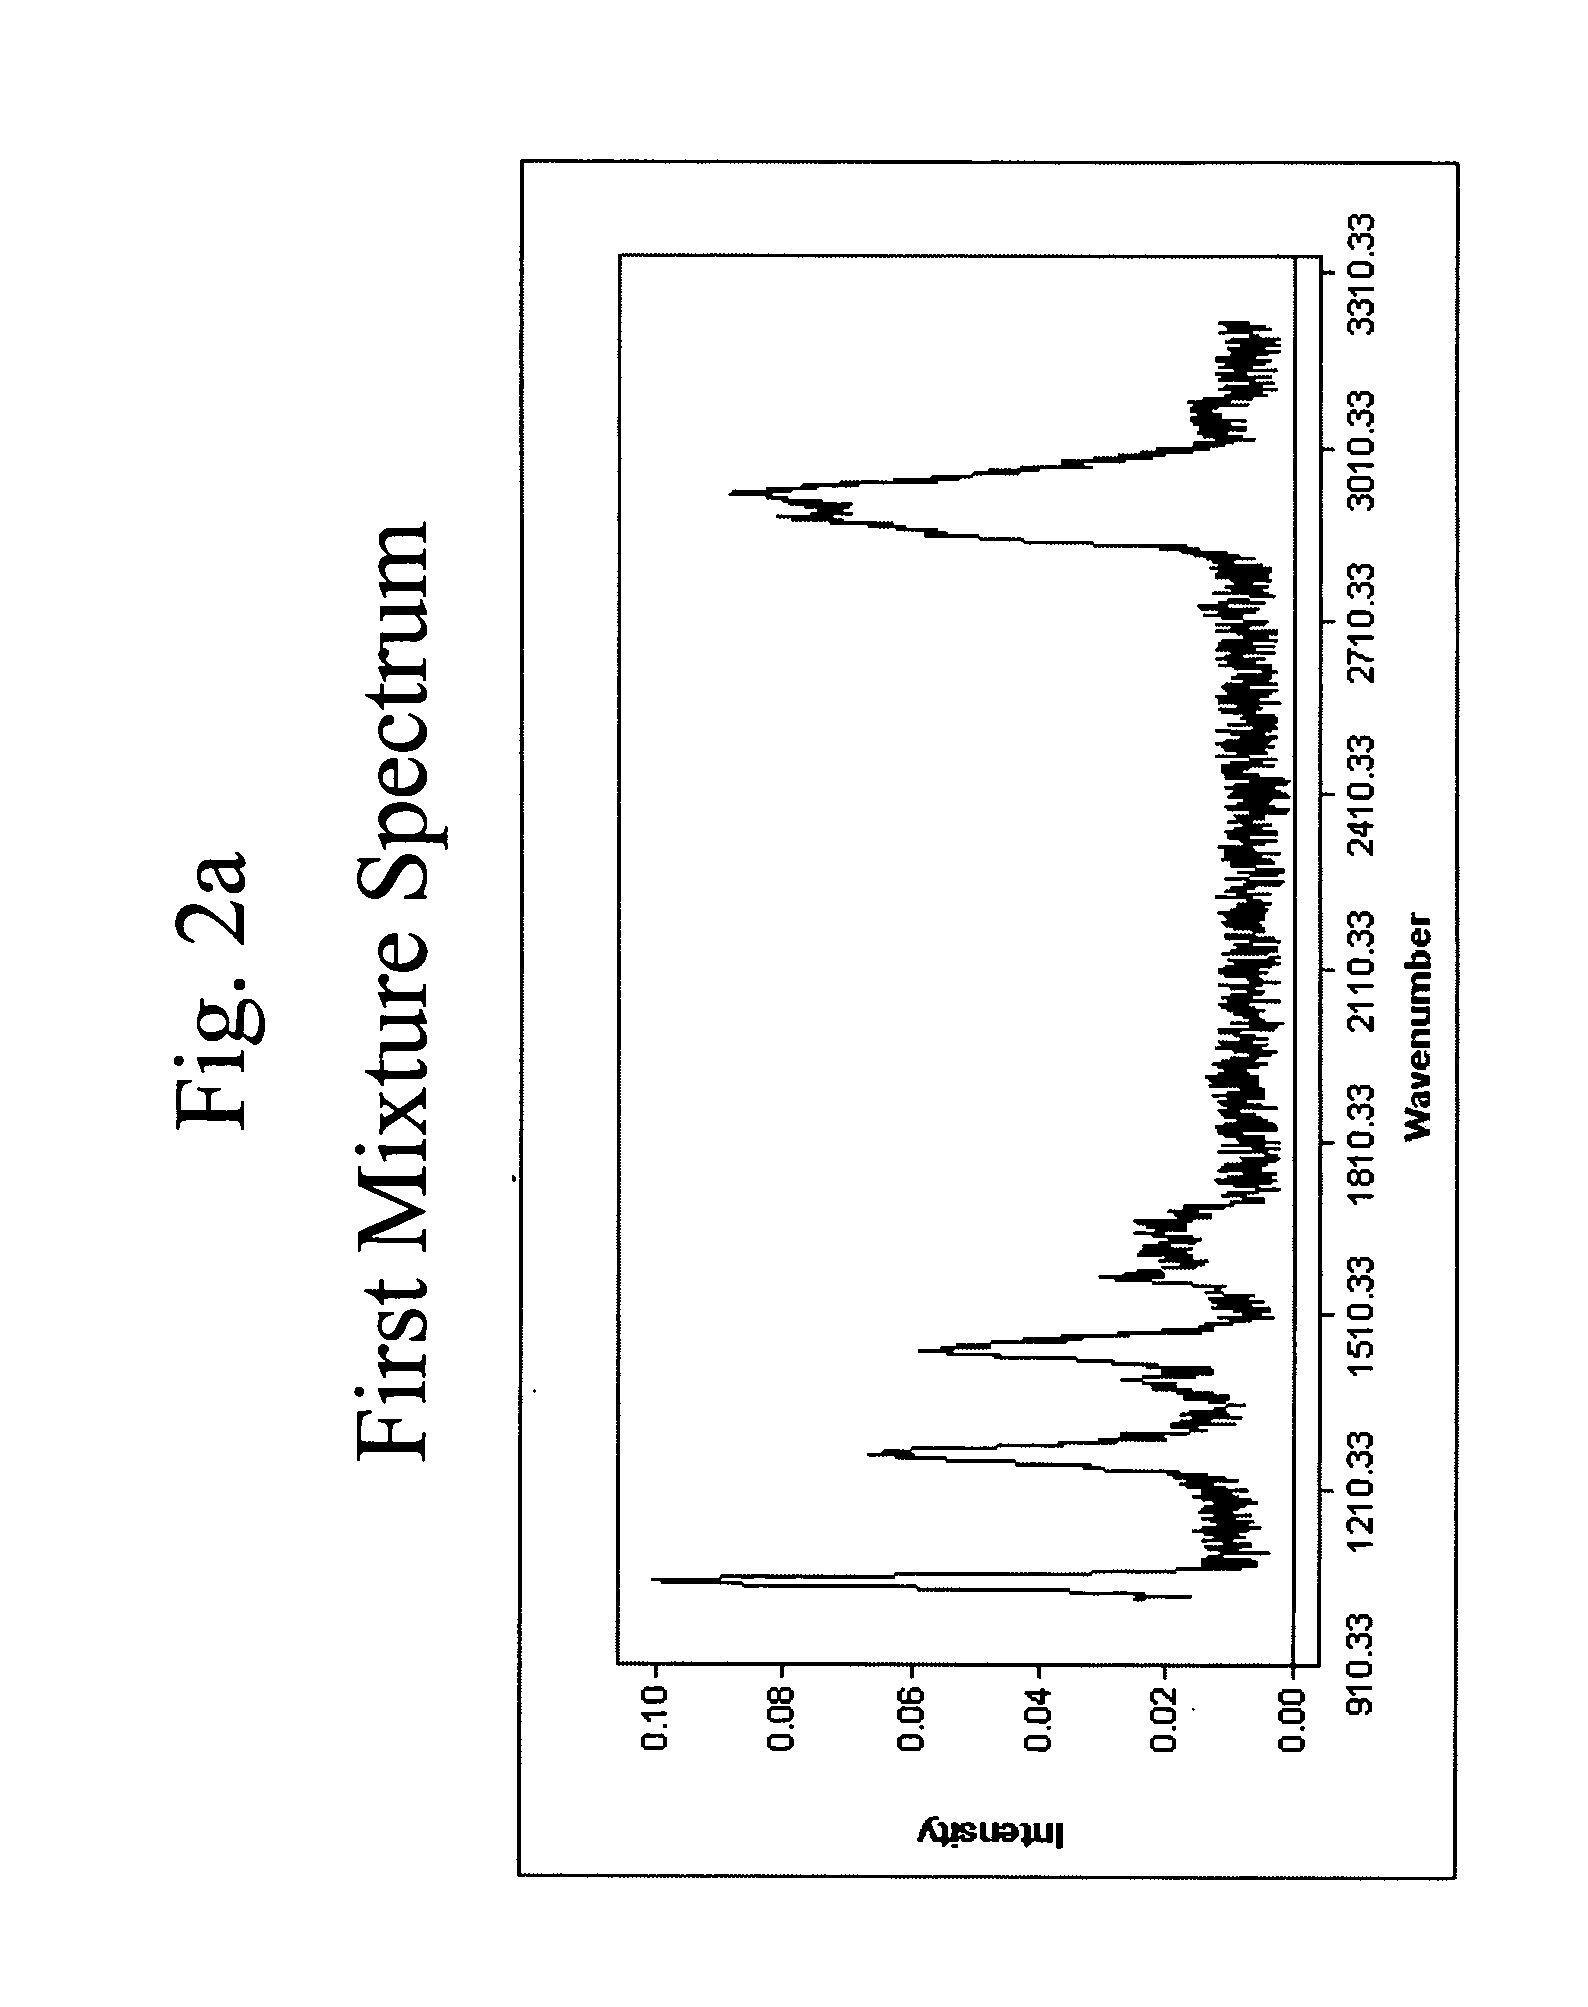 Method for identifying components of a mixture via spectral analysis